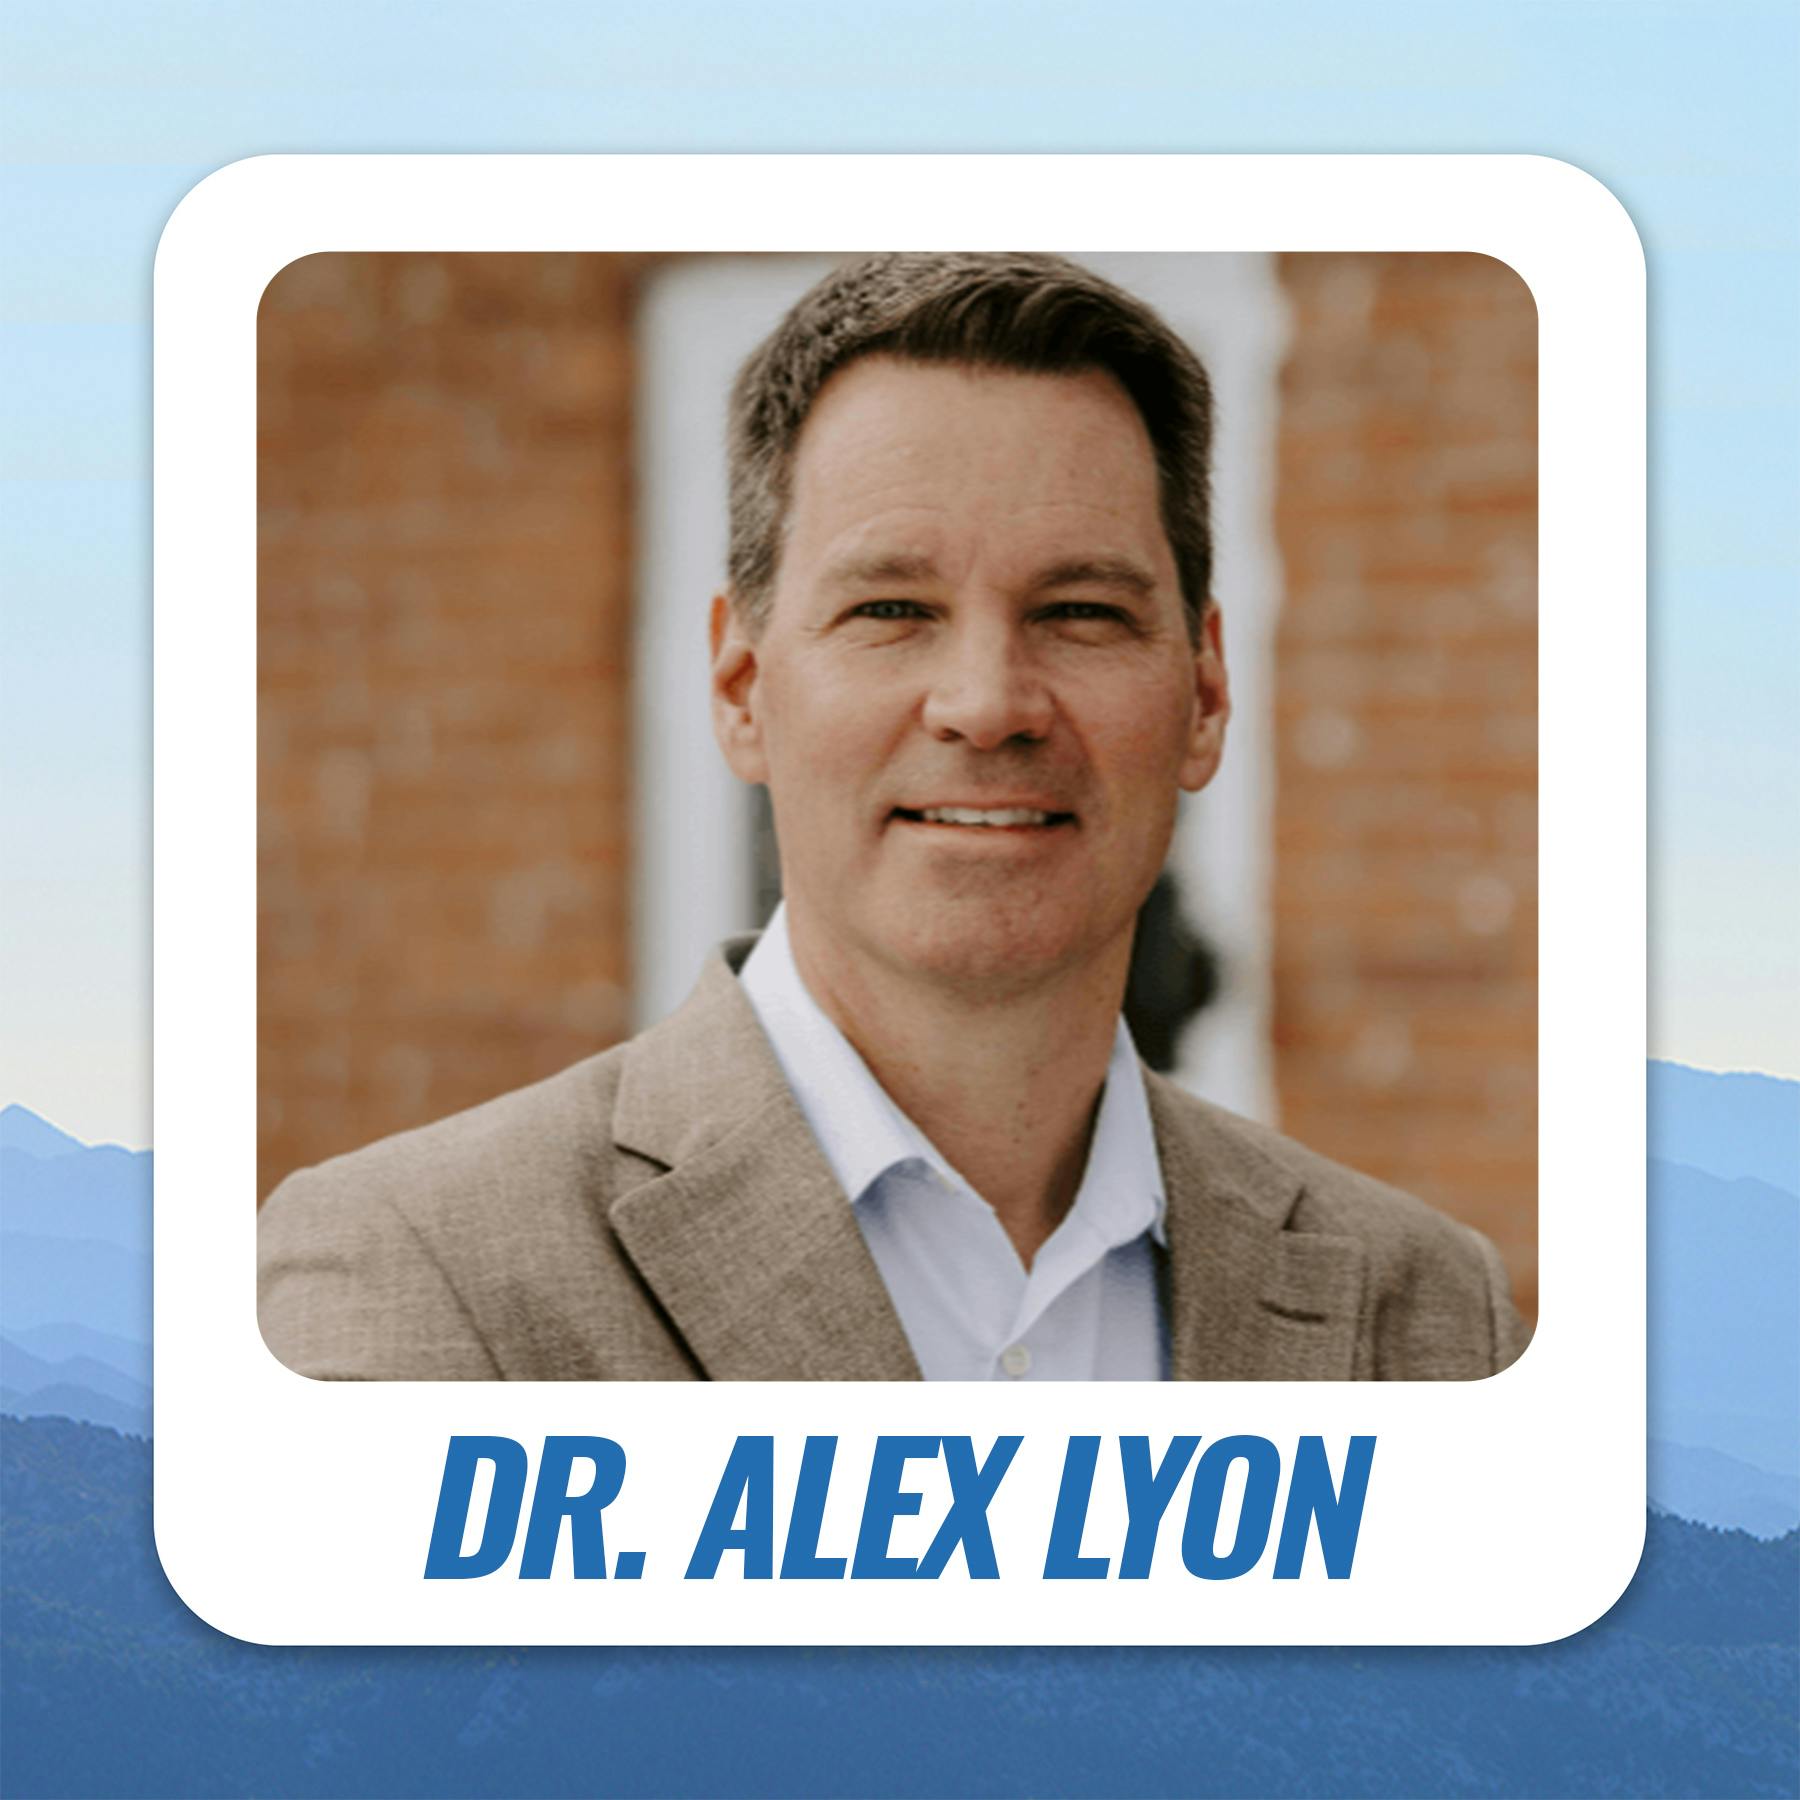 The Art of Connection with Dr. Alex Lyon